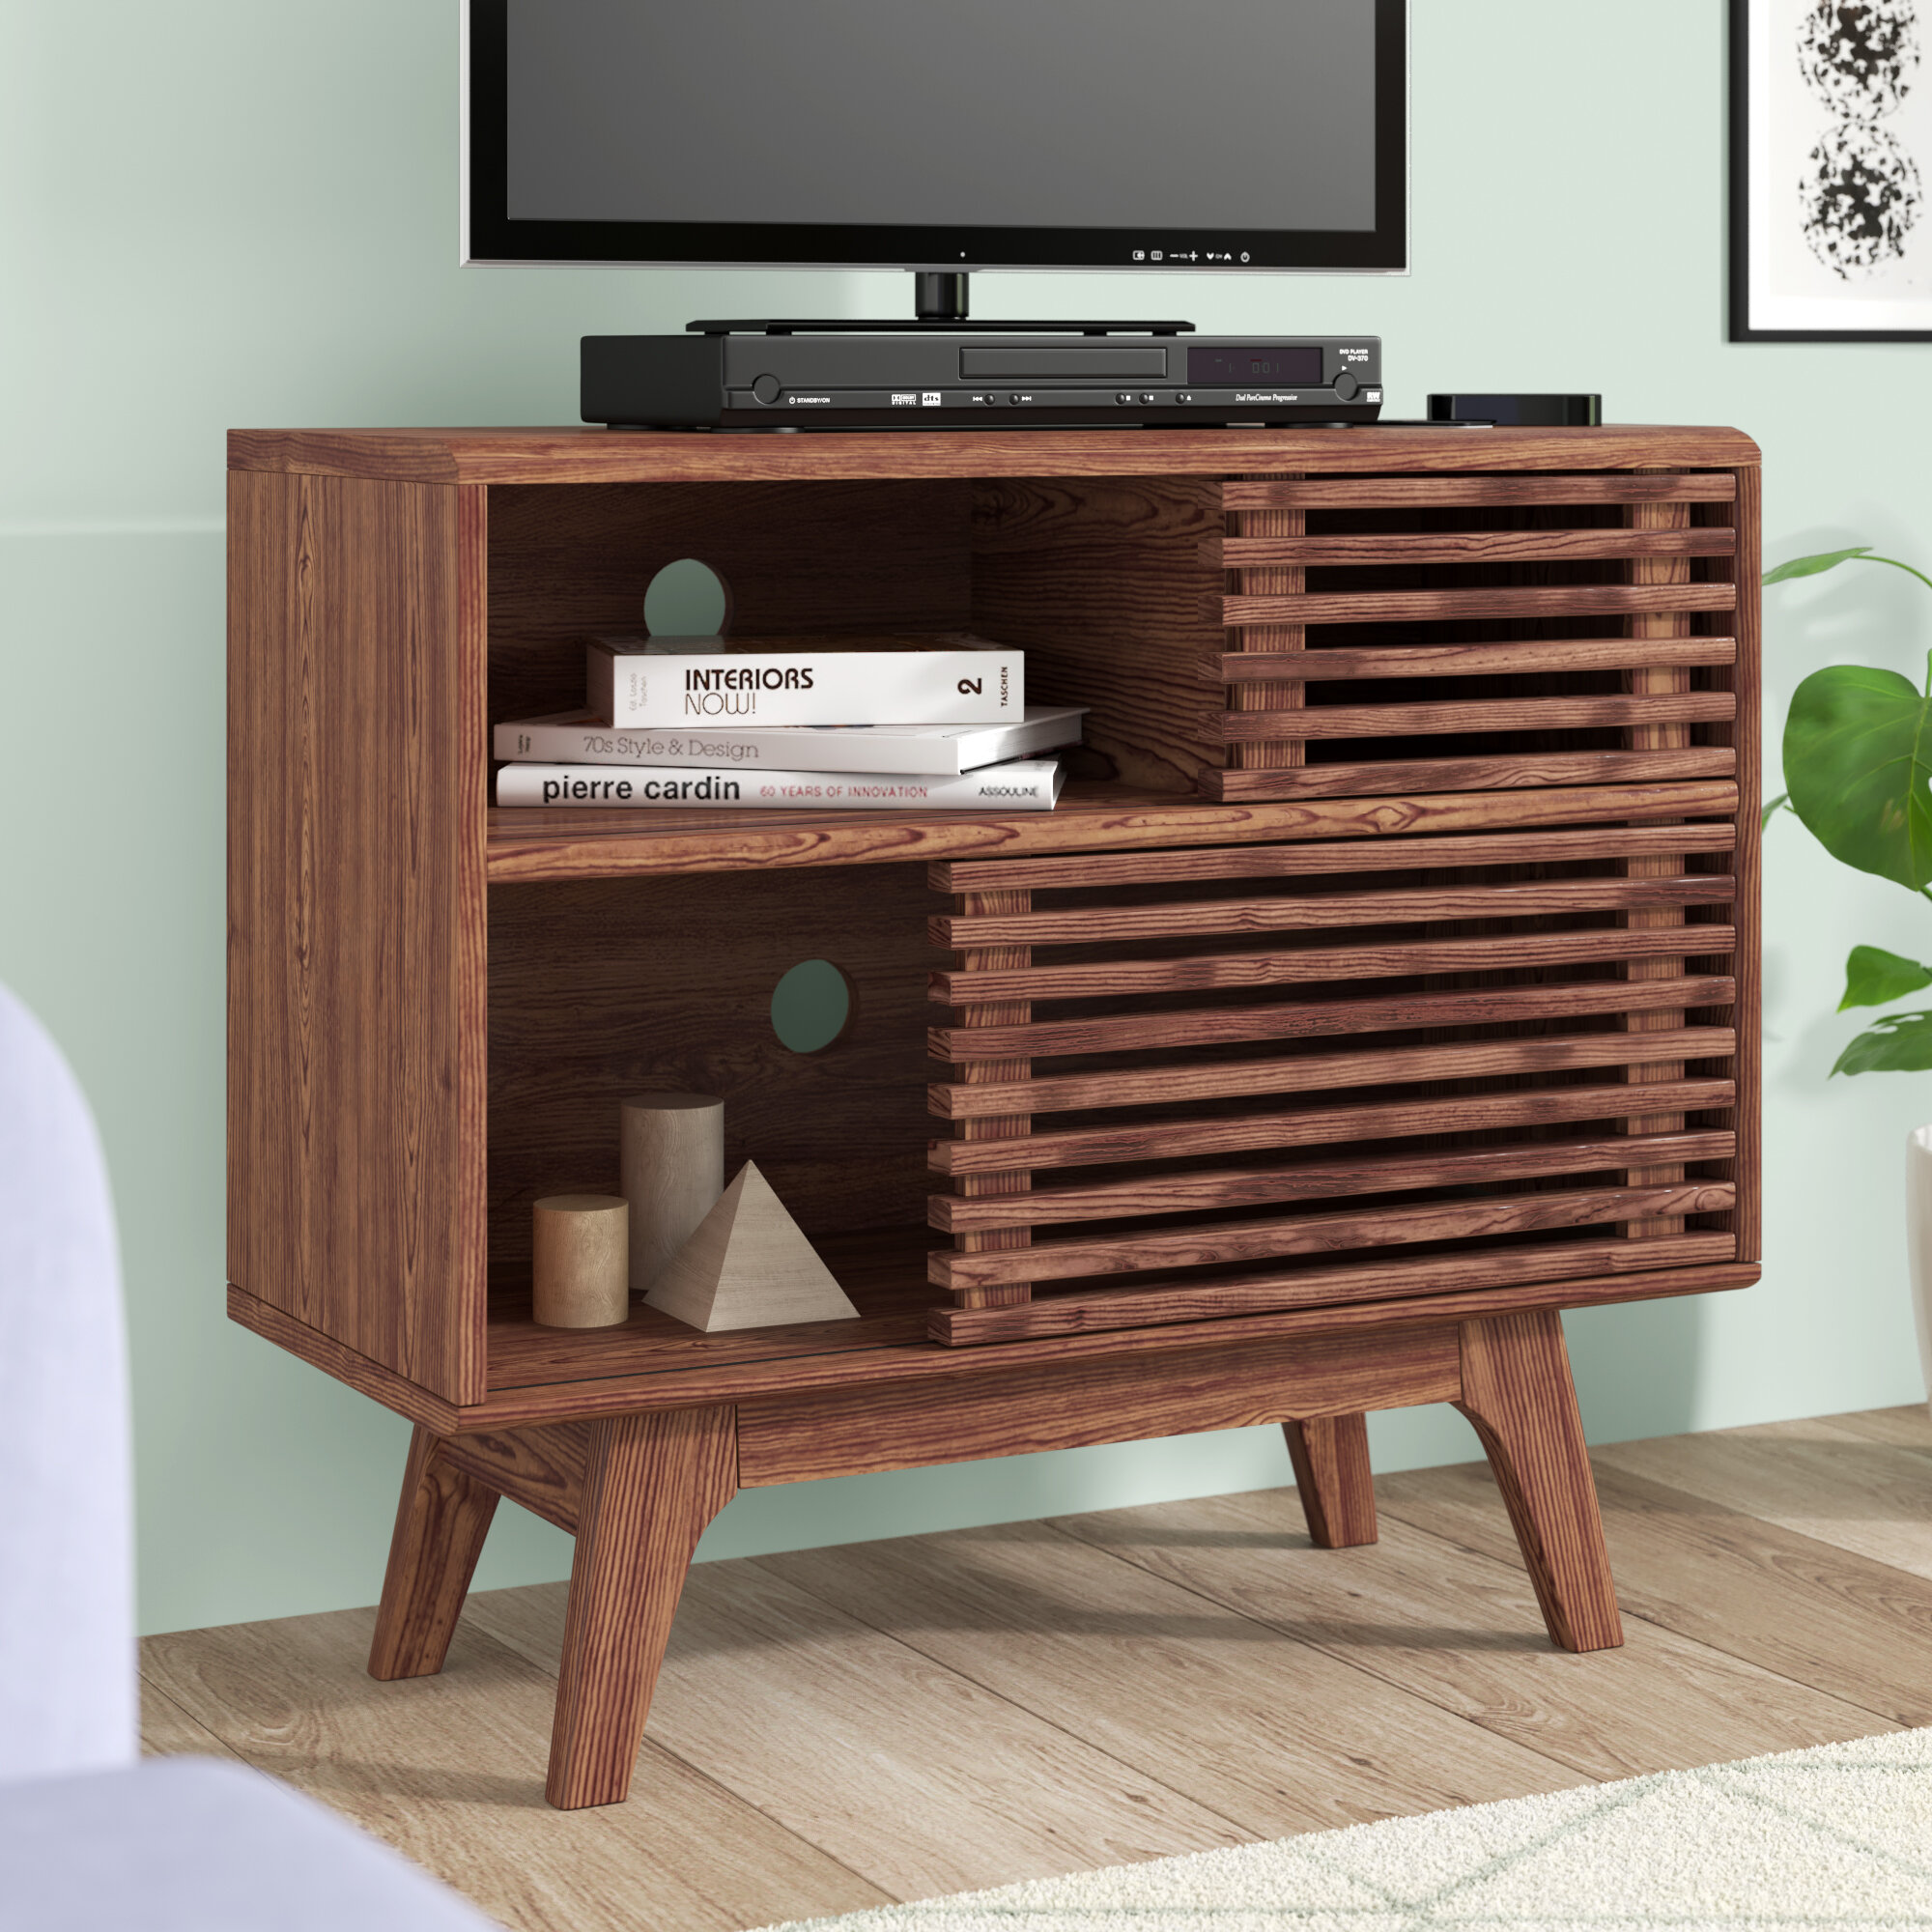 George Oliver Tv Stand For Tvs Up To 32 Reviews Wayfaircouk